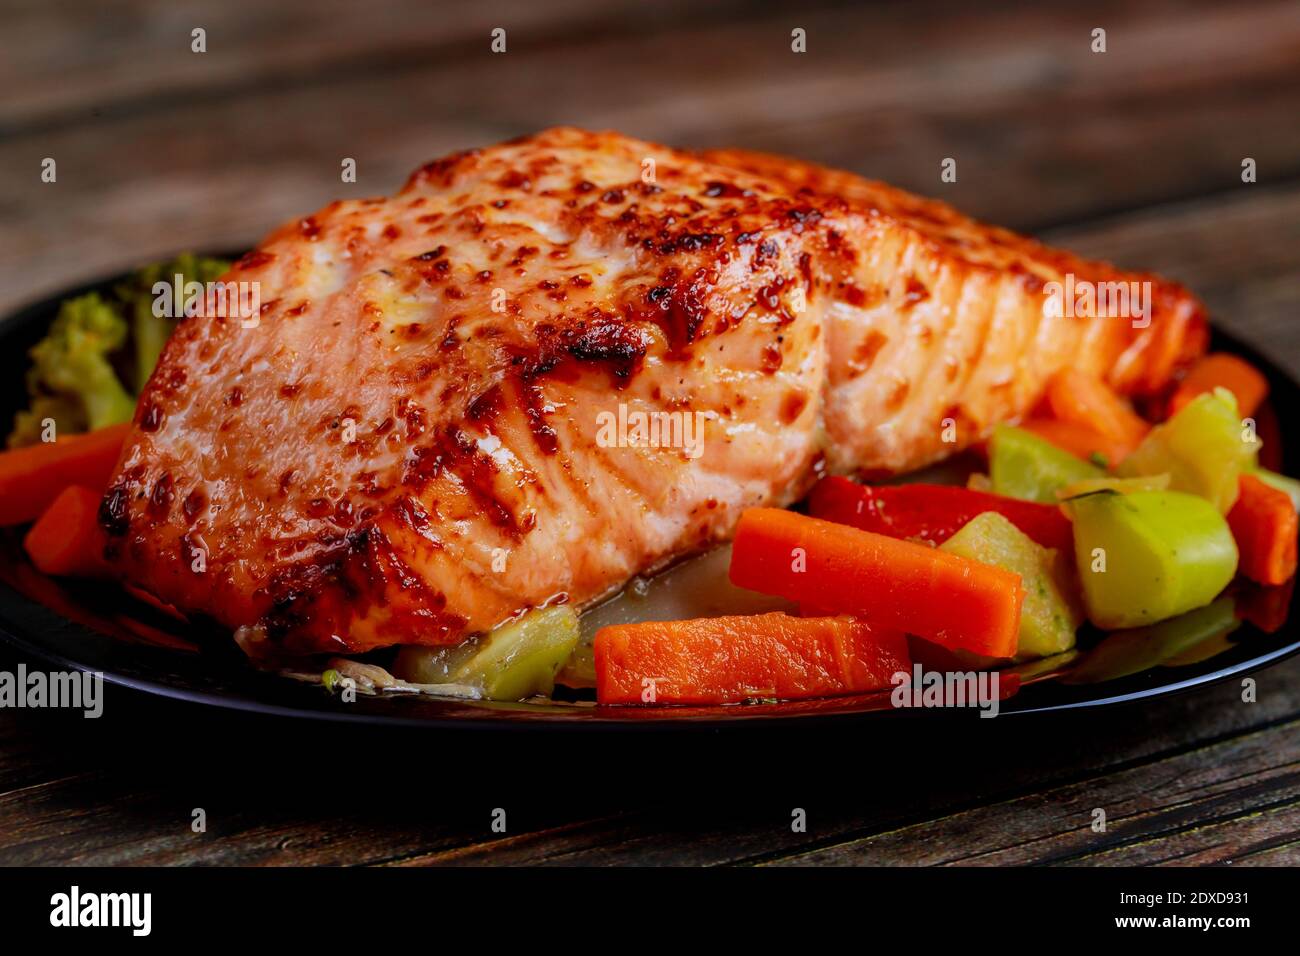 Baked juicy salmon fillet with steamed vegetables on black plate ...